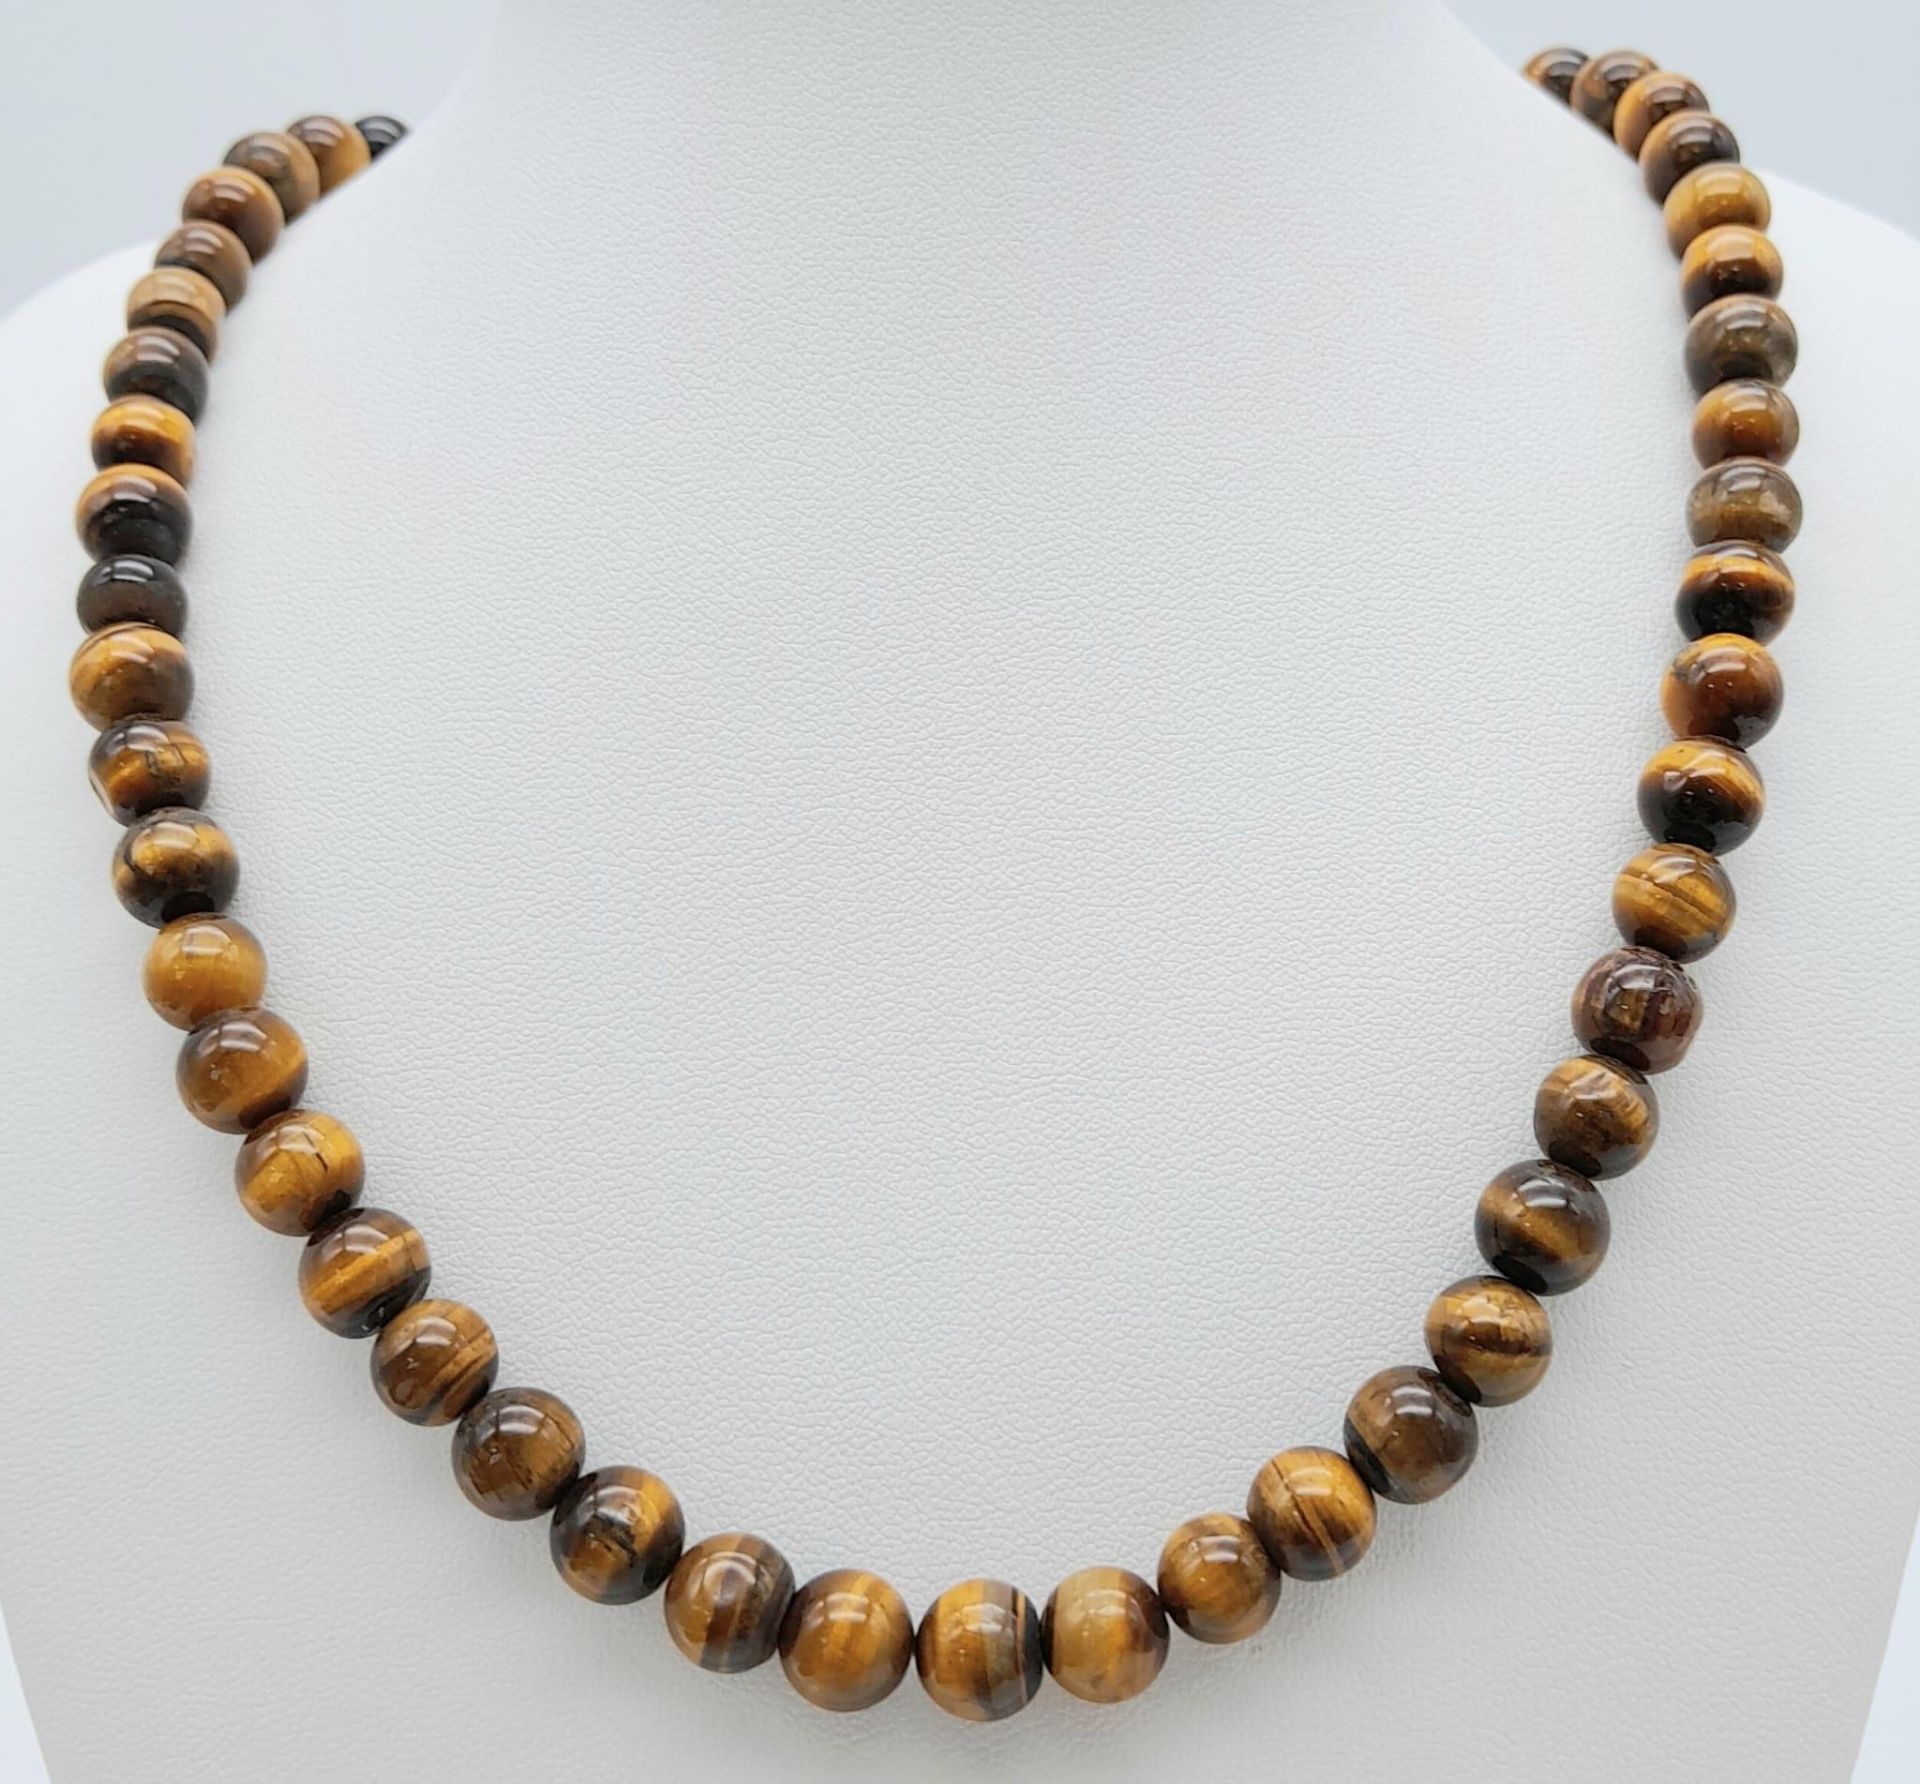 A Vintage Tigers Eye Bead Necklace. Screw clasp. 46cm